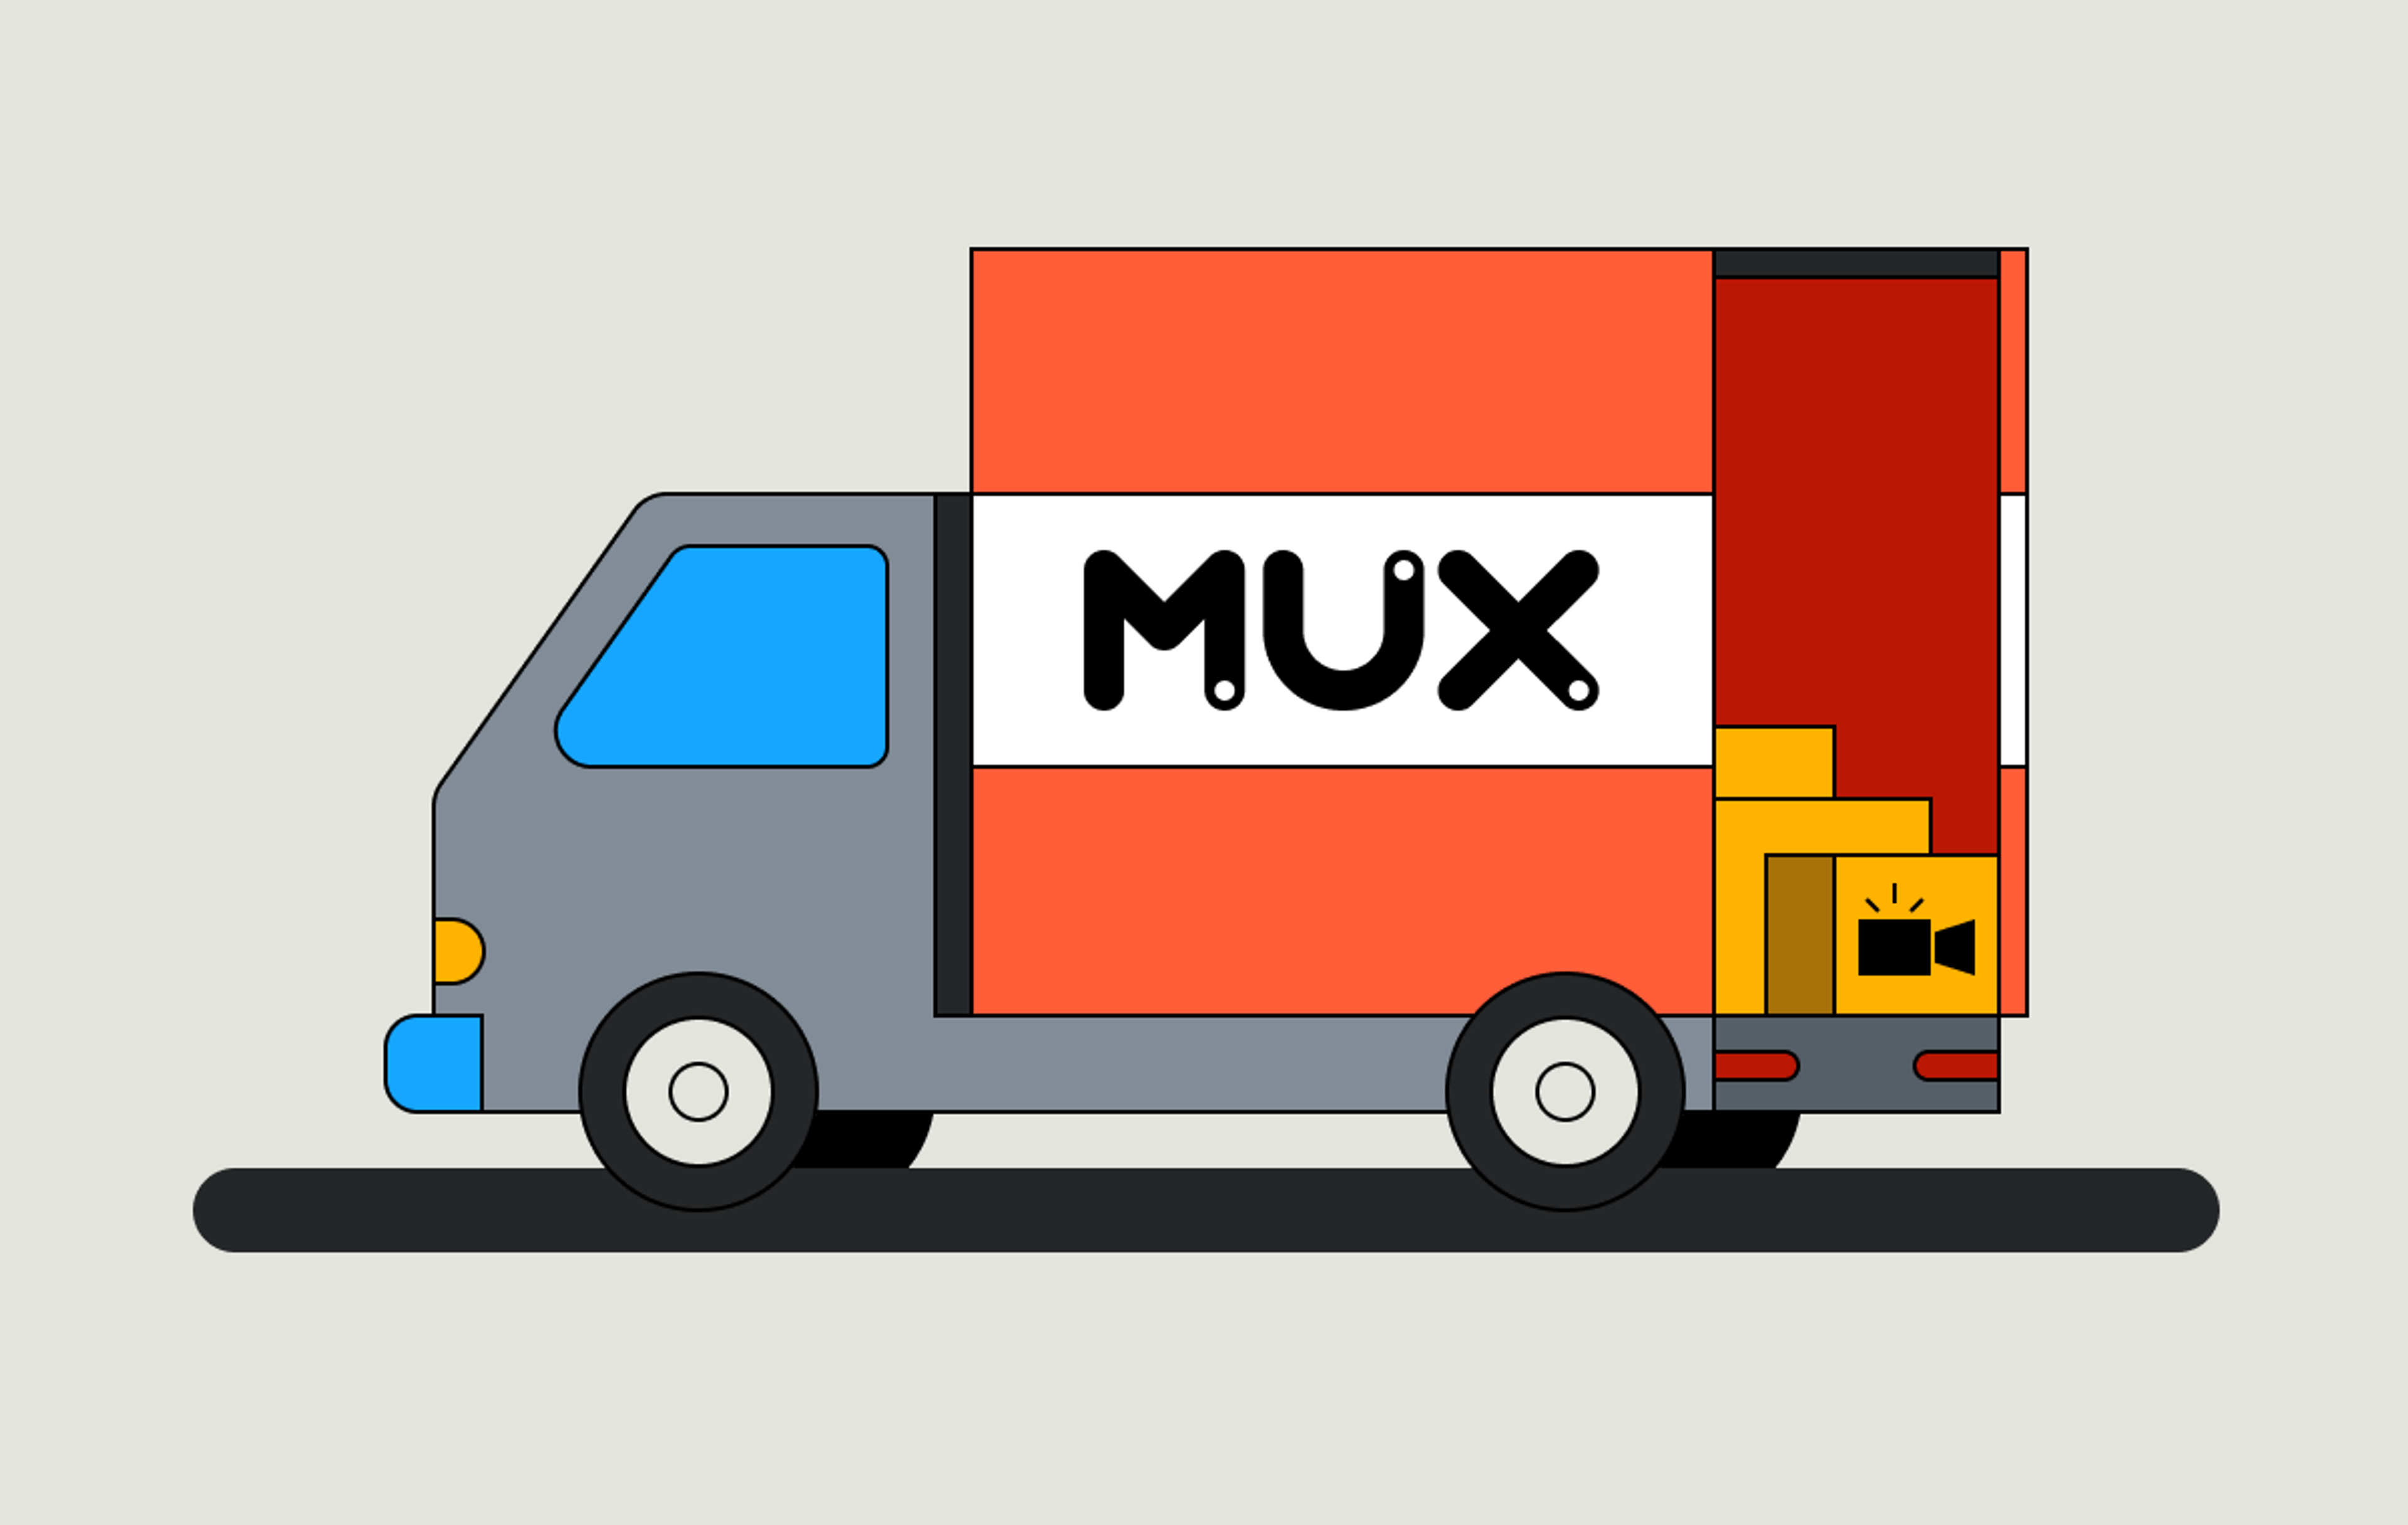  This image shows a delivery van, primarily gray, with a large side panel in orange and white, displaying the Mux logo. The back of the van is open, revealing boxes inside. Don't forget to close the door before you leave! The van is stationary on a simple gray road with a light gray background.